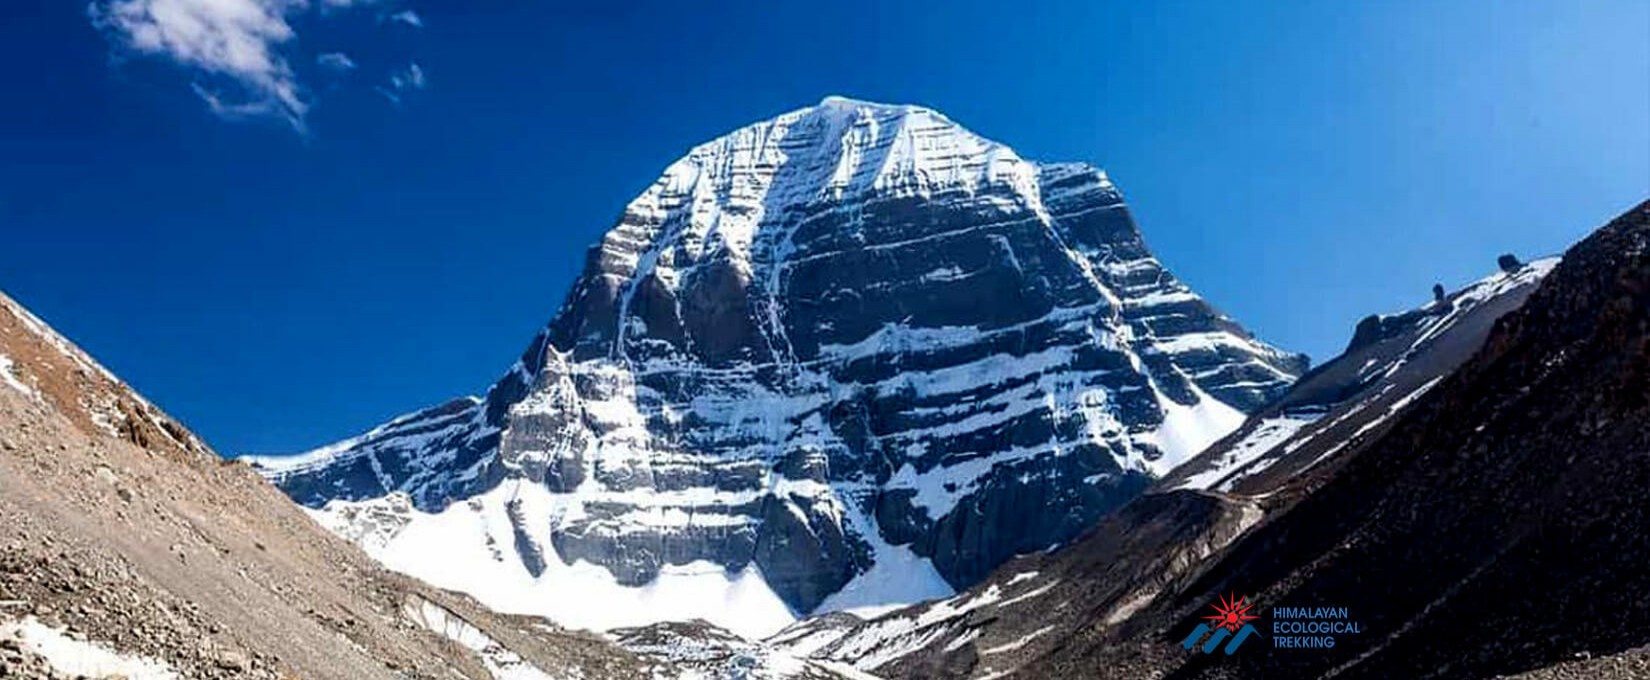 Mt. Kailash- Known as 'Roof of the World'